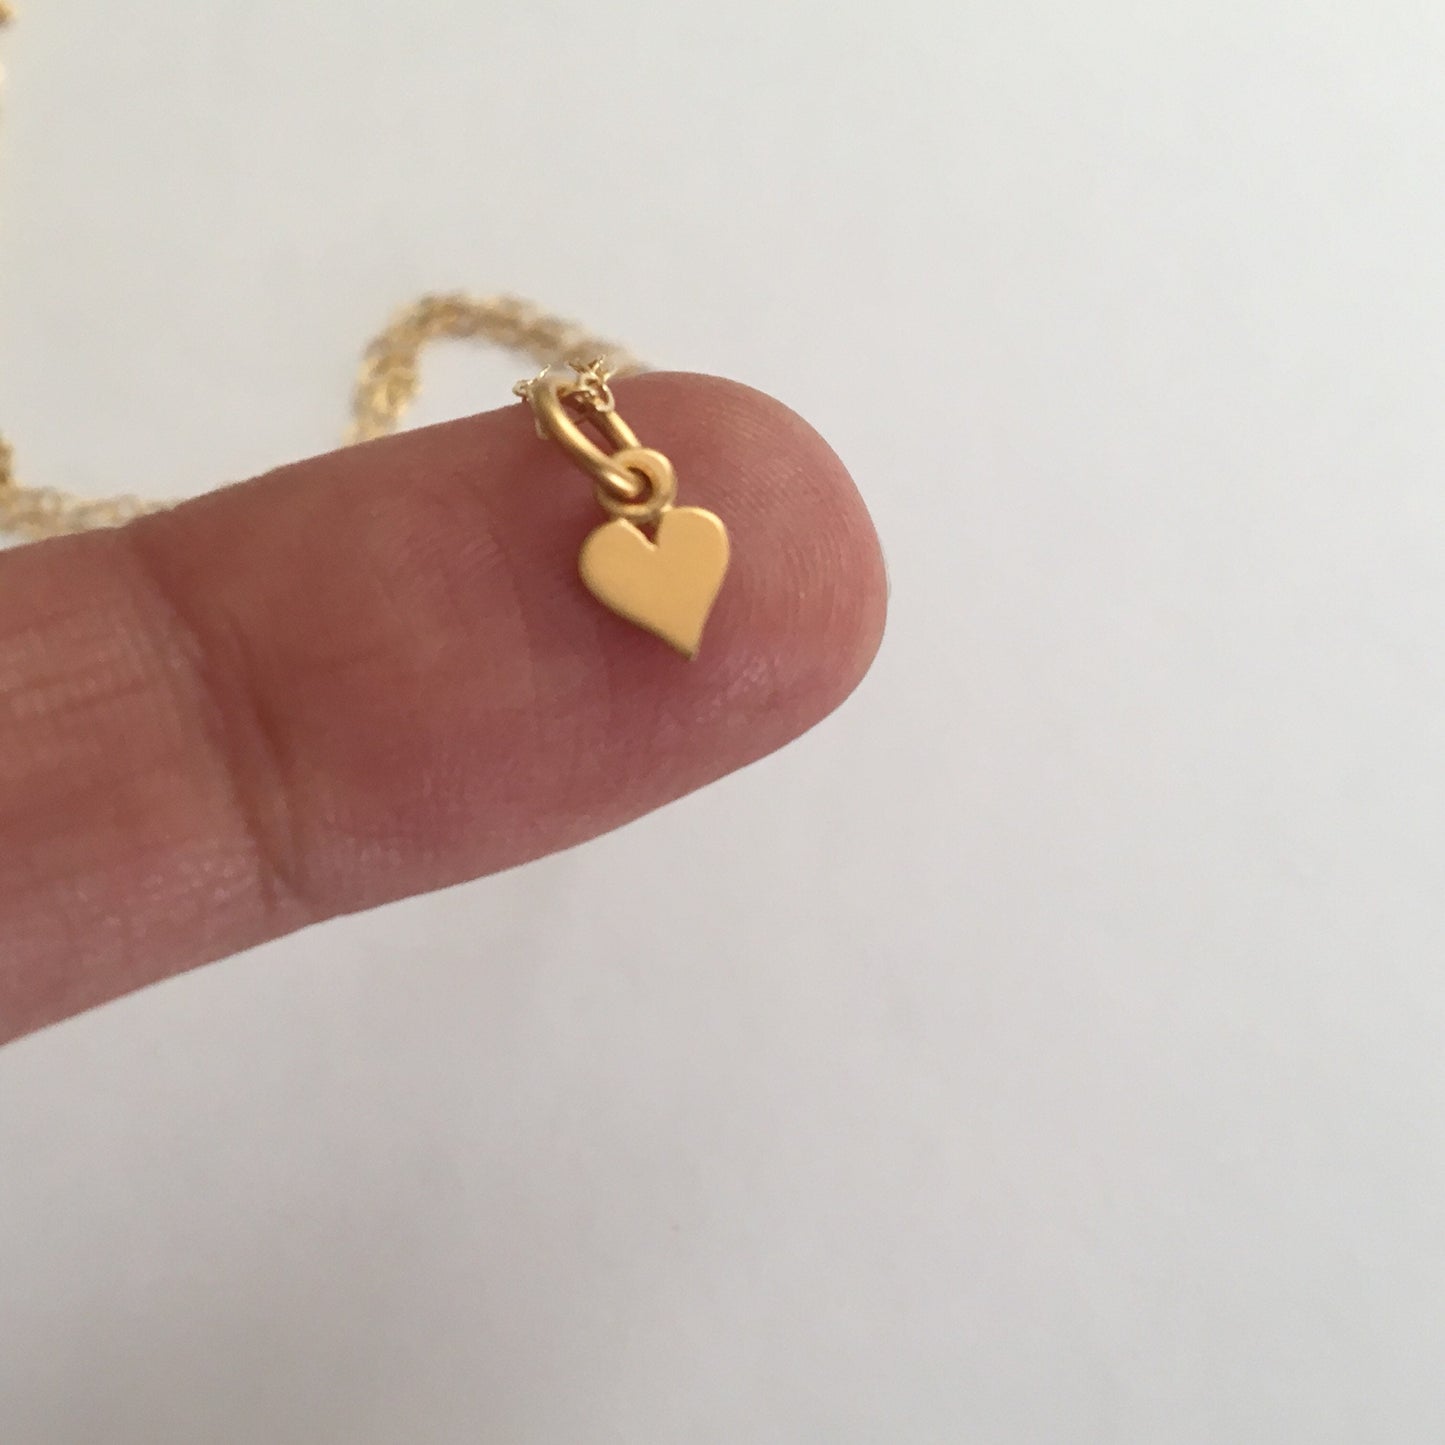 Tiny gold heart necklace with pearl or birthstone